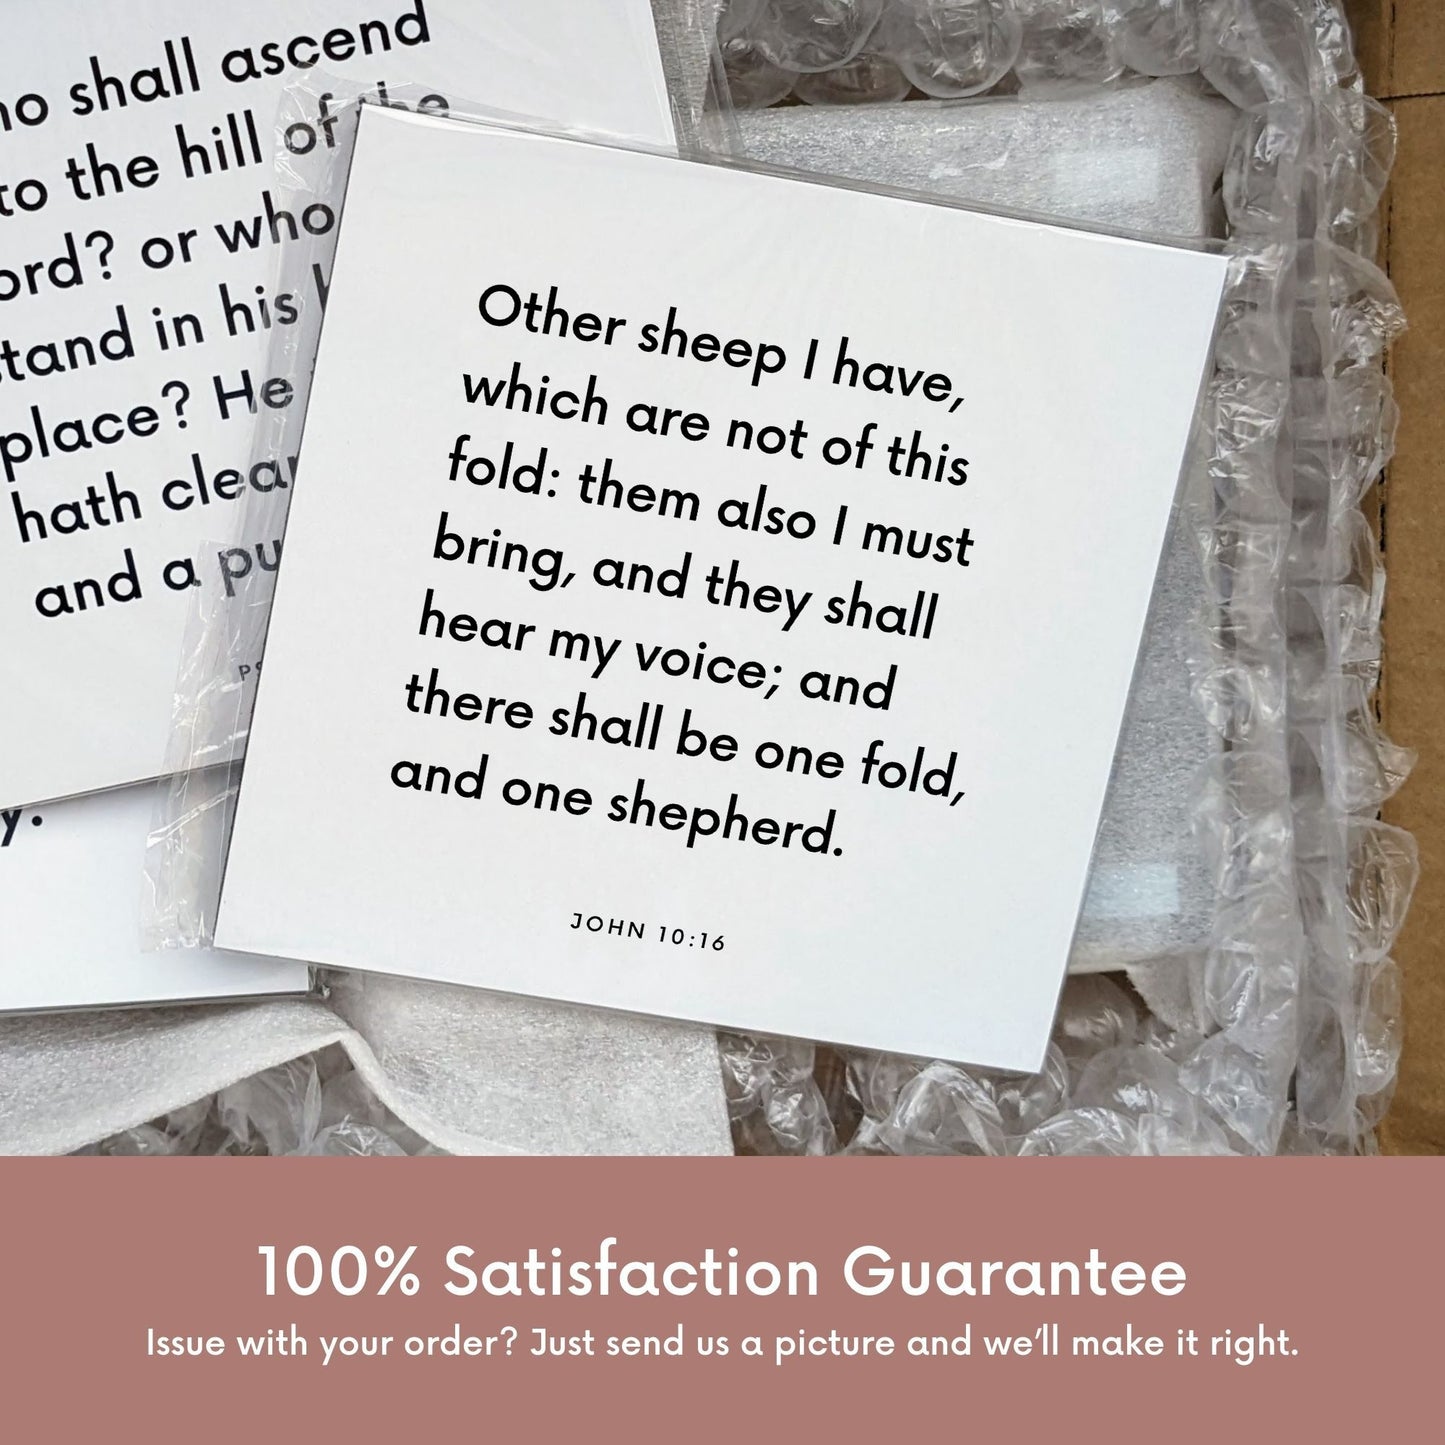 Shipping materials for scripture tile of John 10:16 - "Other sheep I have, which are not of this fold"